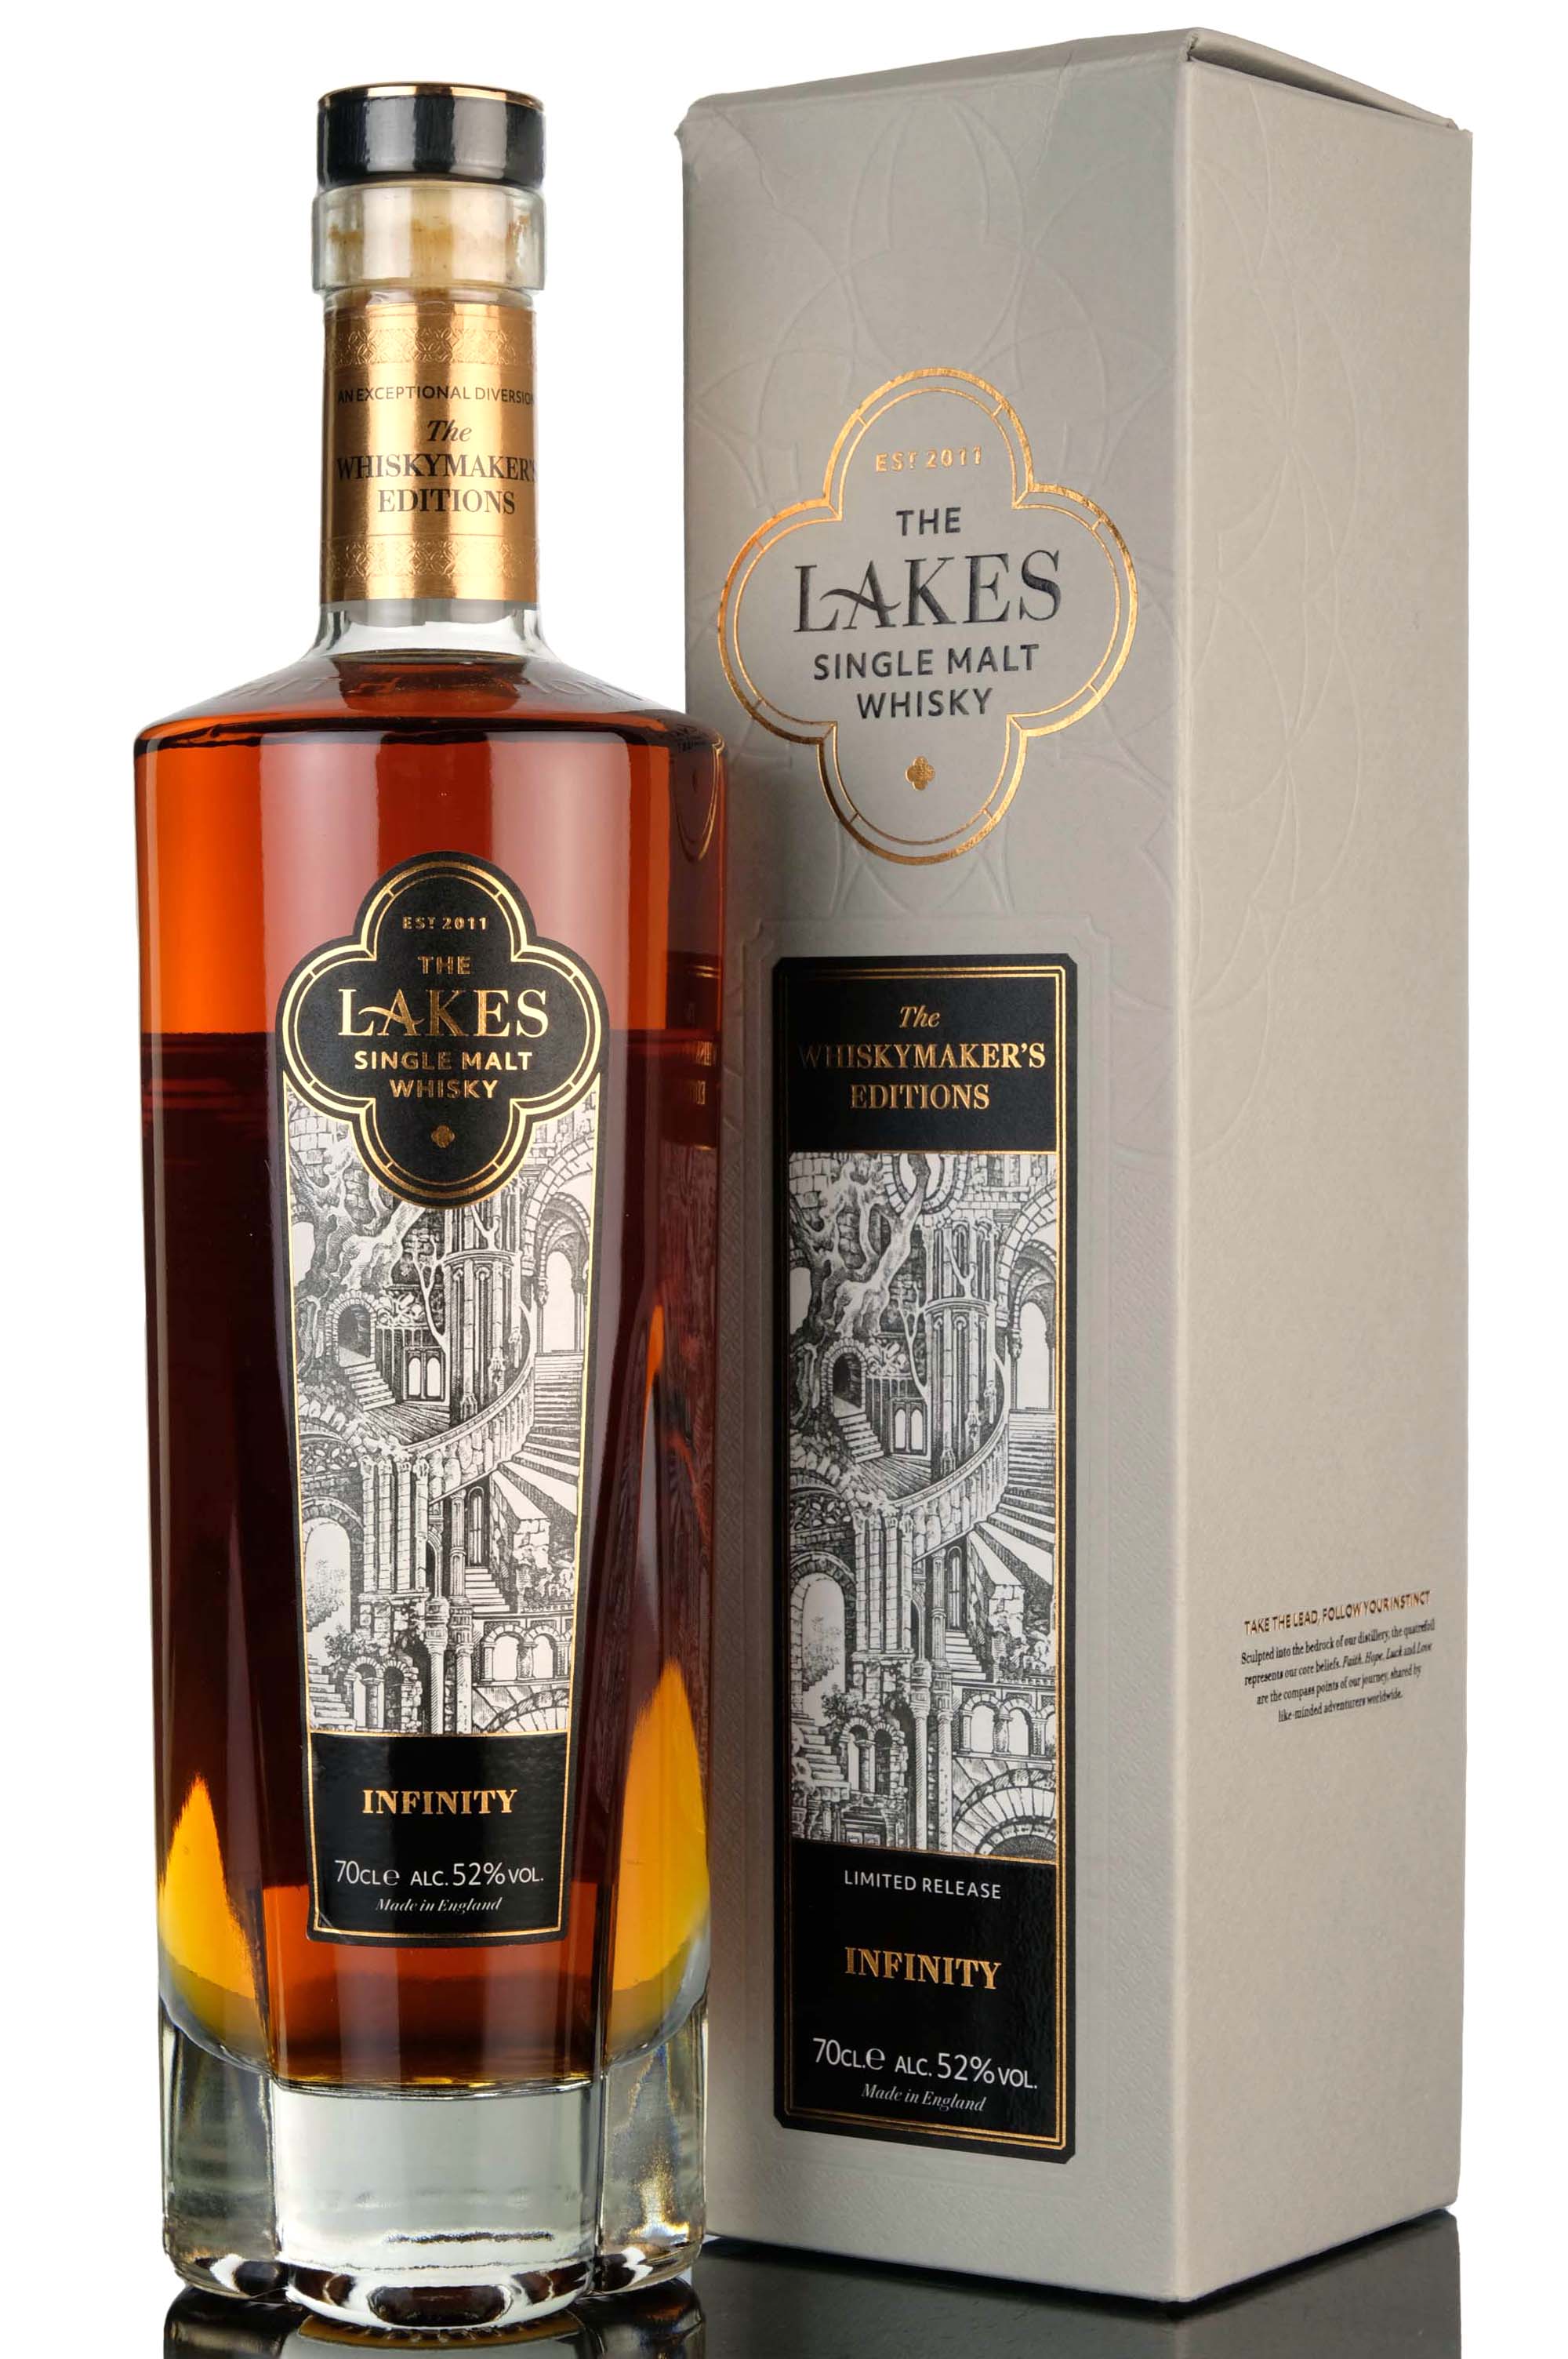 The Lakes Distillery The Whiskymakers Editions Infinity - 2021 Release